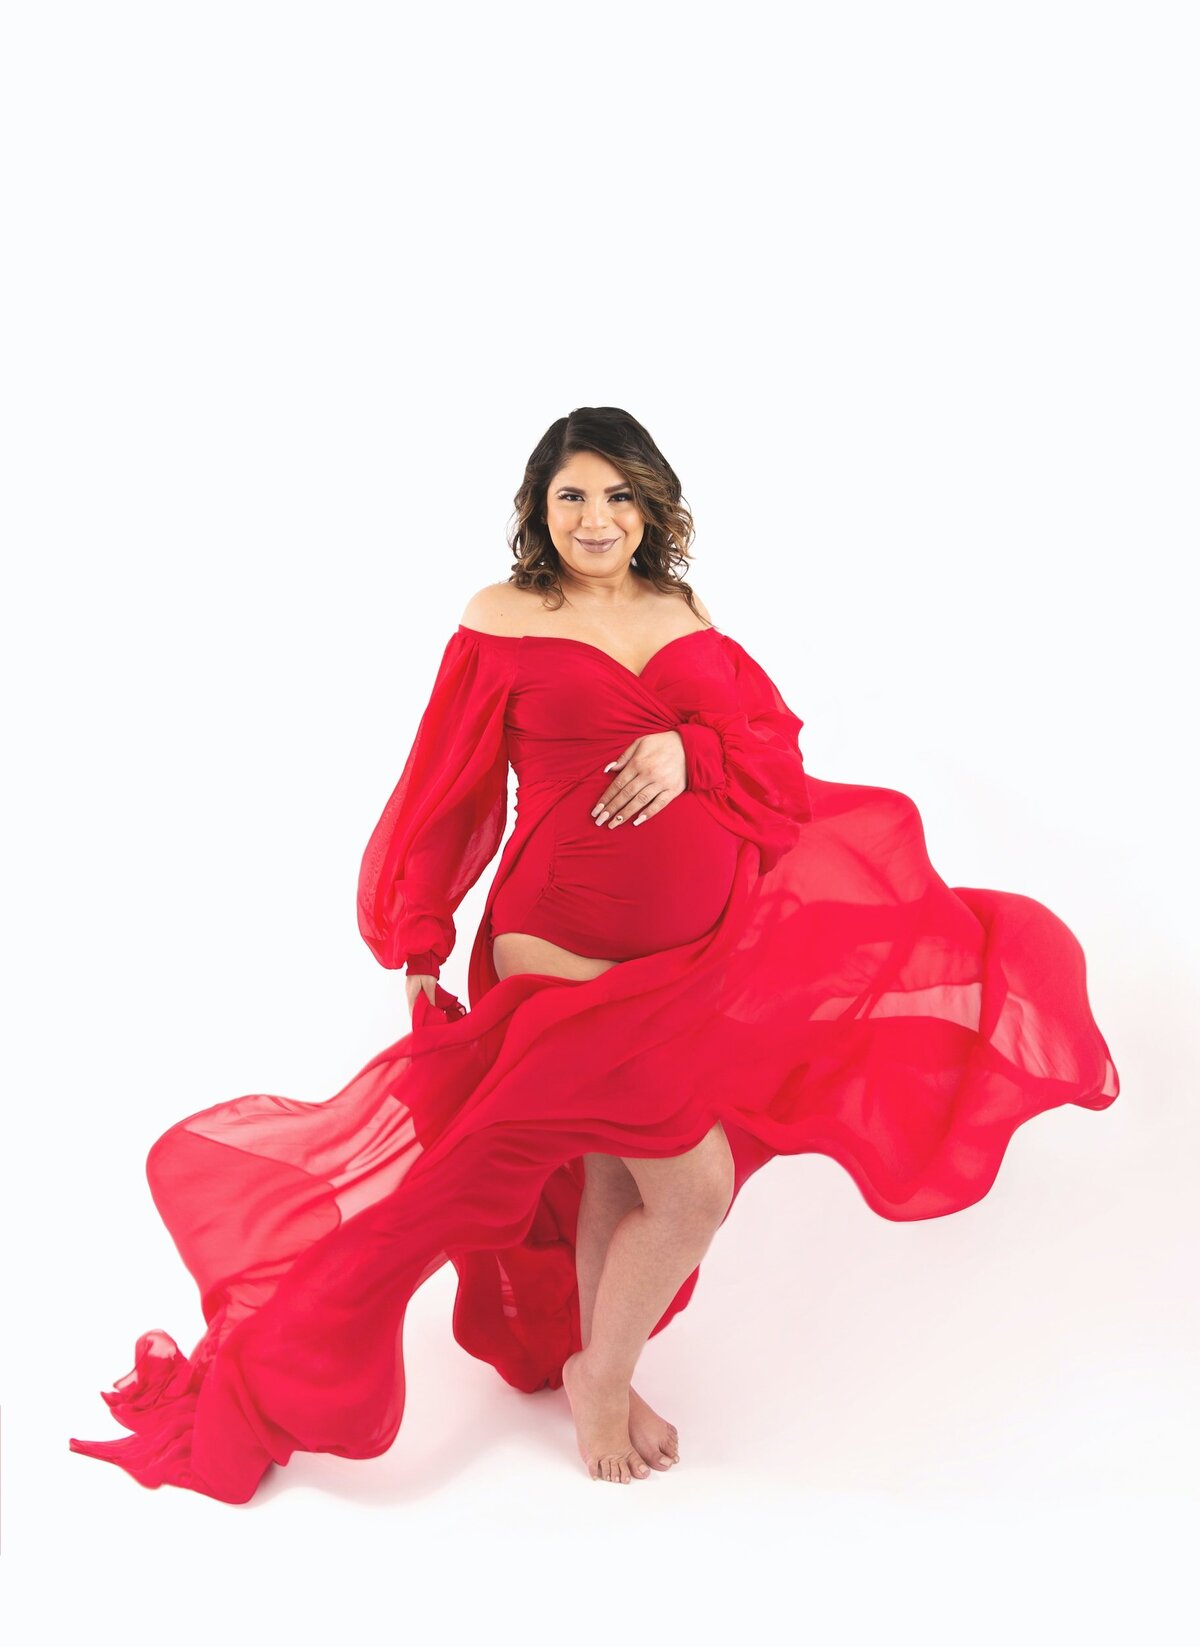 Maternity studio shoot with flowy red dress